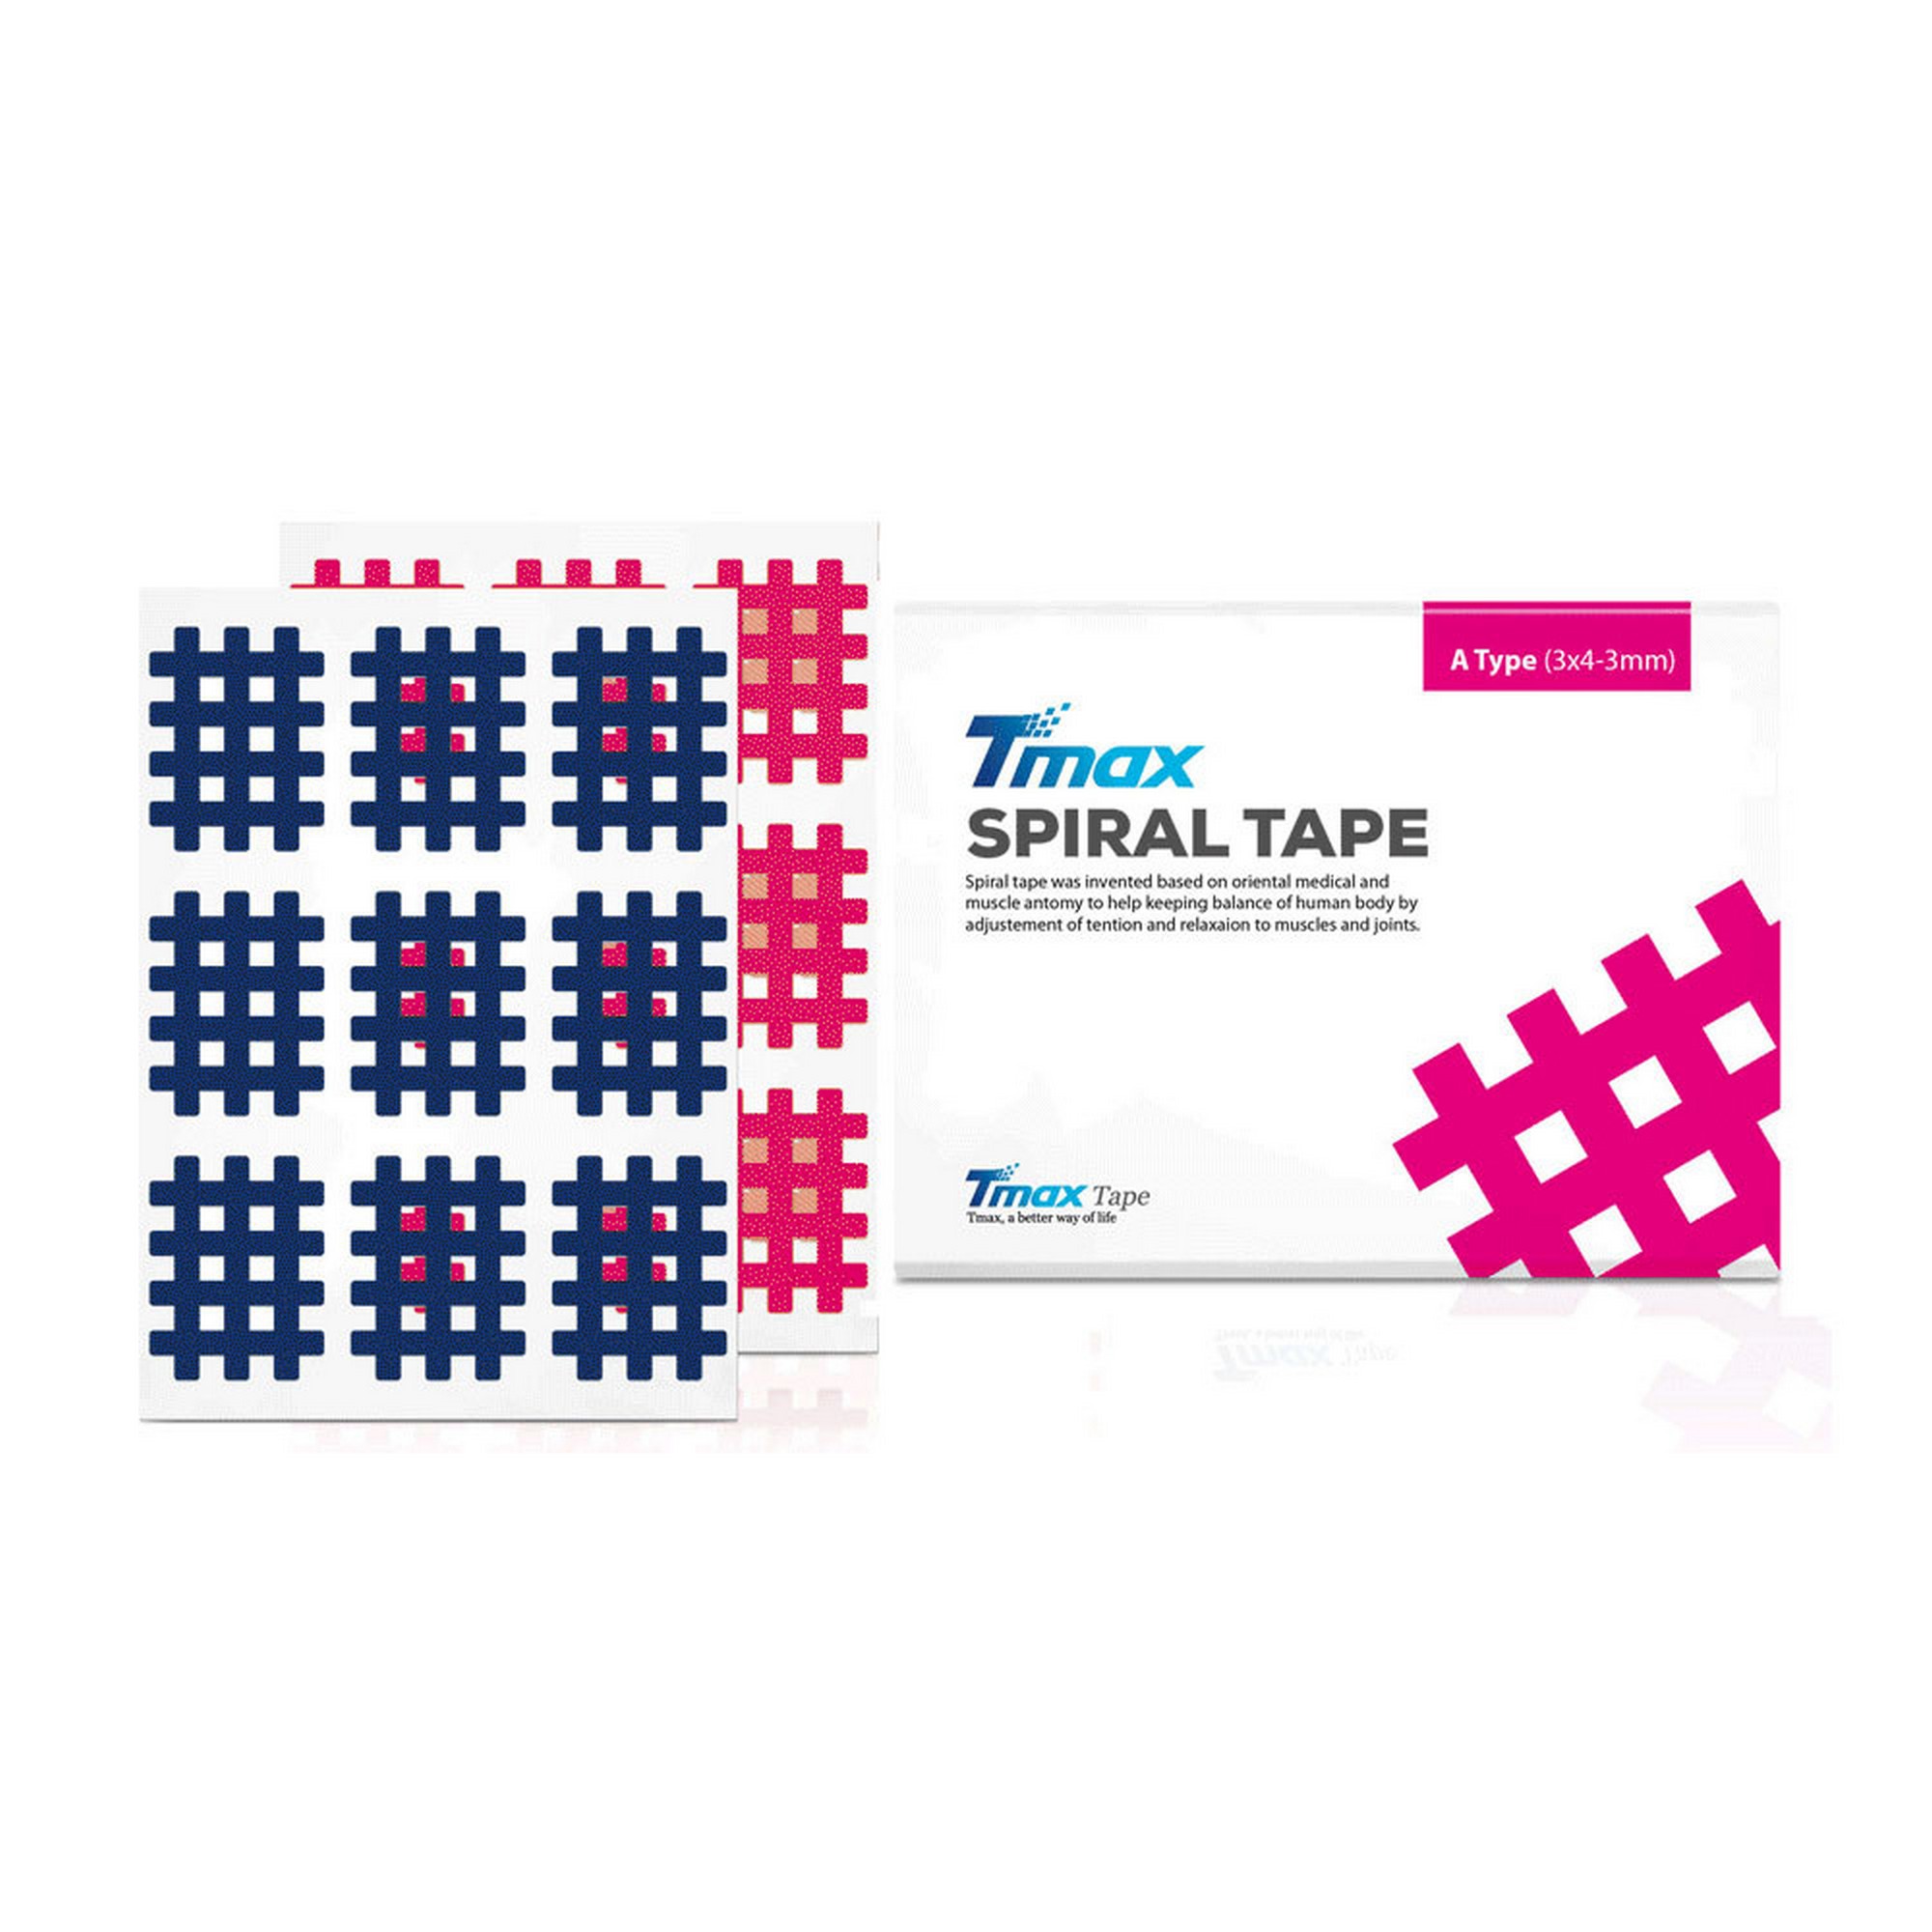 - Tmax Spiral Tape Type A (20 ) 423717 